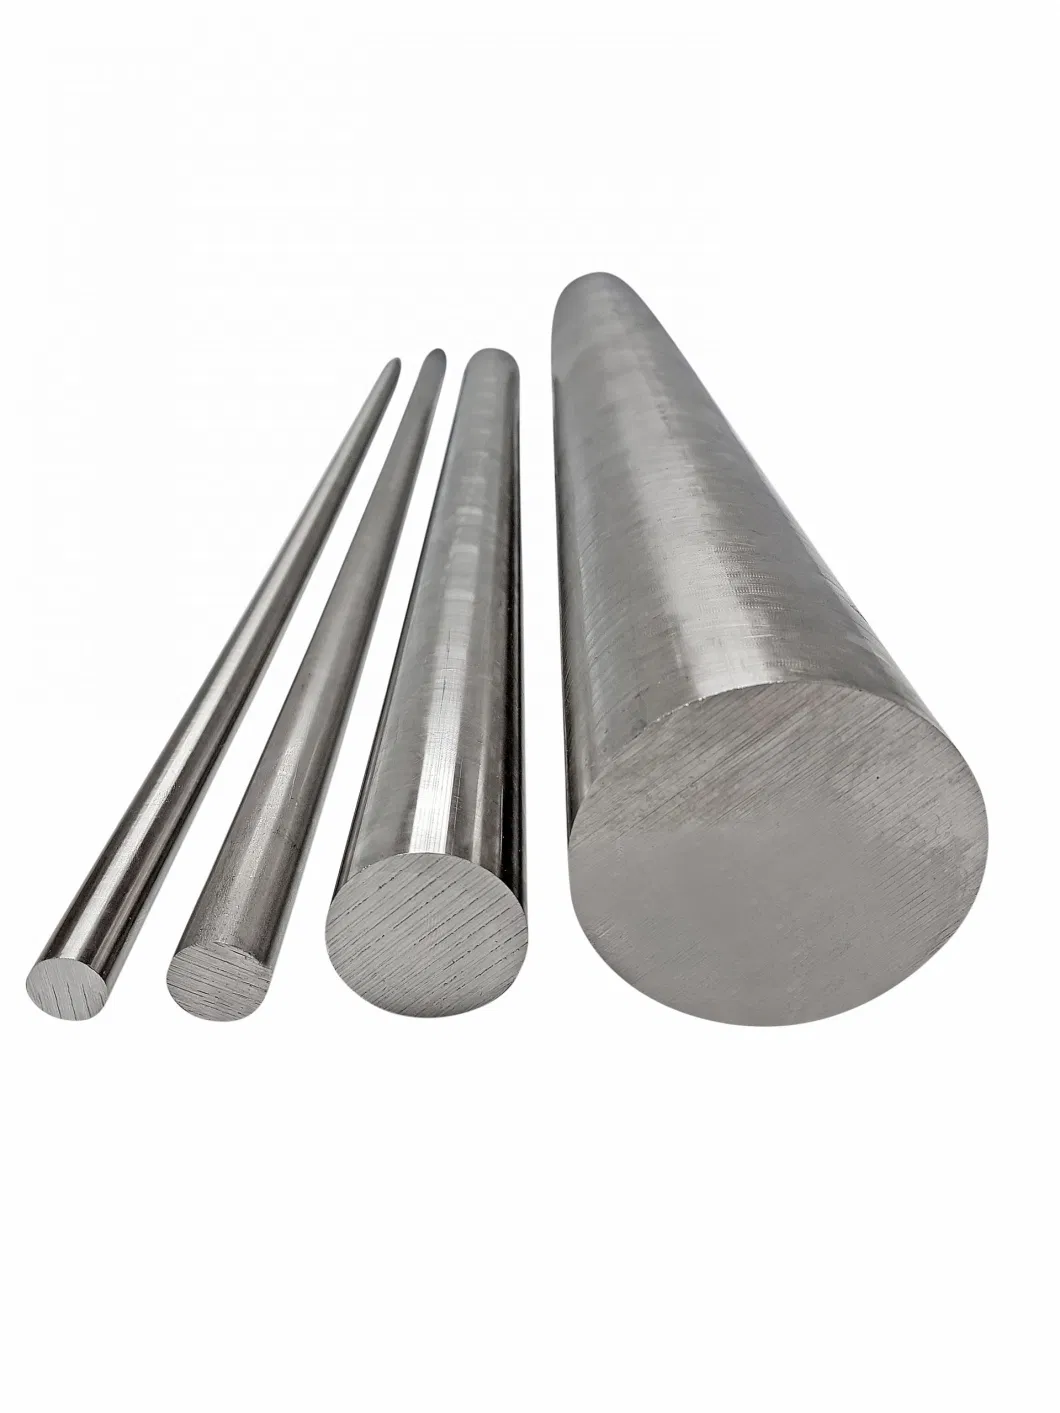 Stainless Steel Bar / Stainless Steel Rod Bright AISI 316L 317L Stainless Steel Rod Price Per Kg